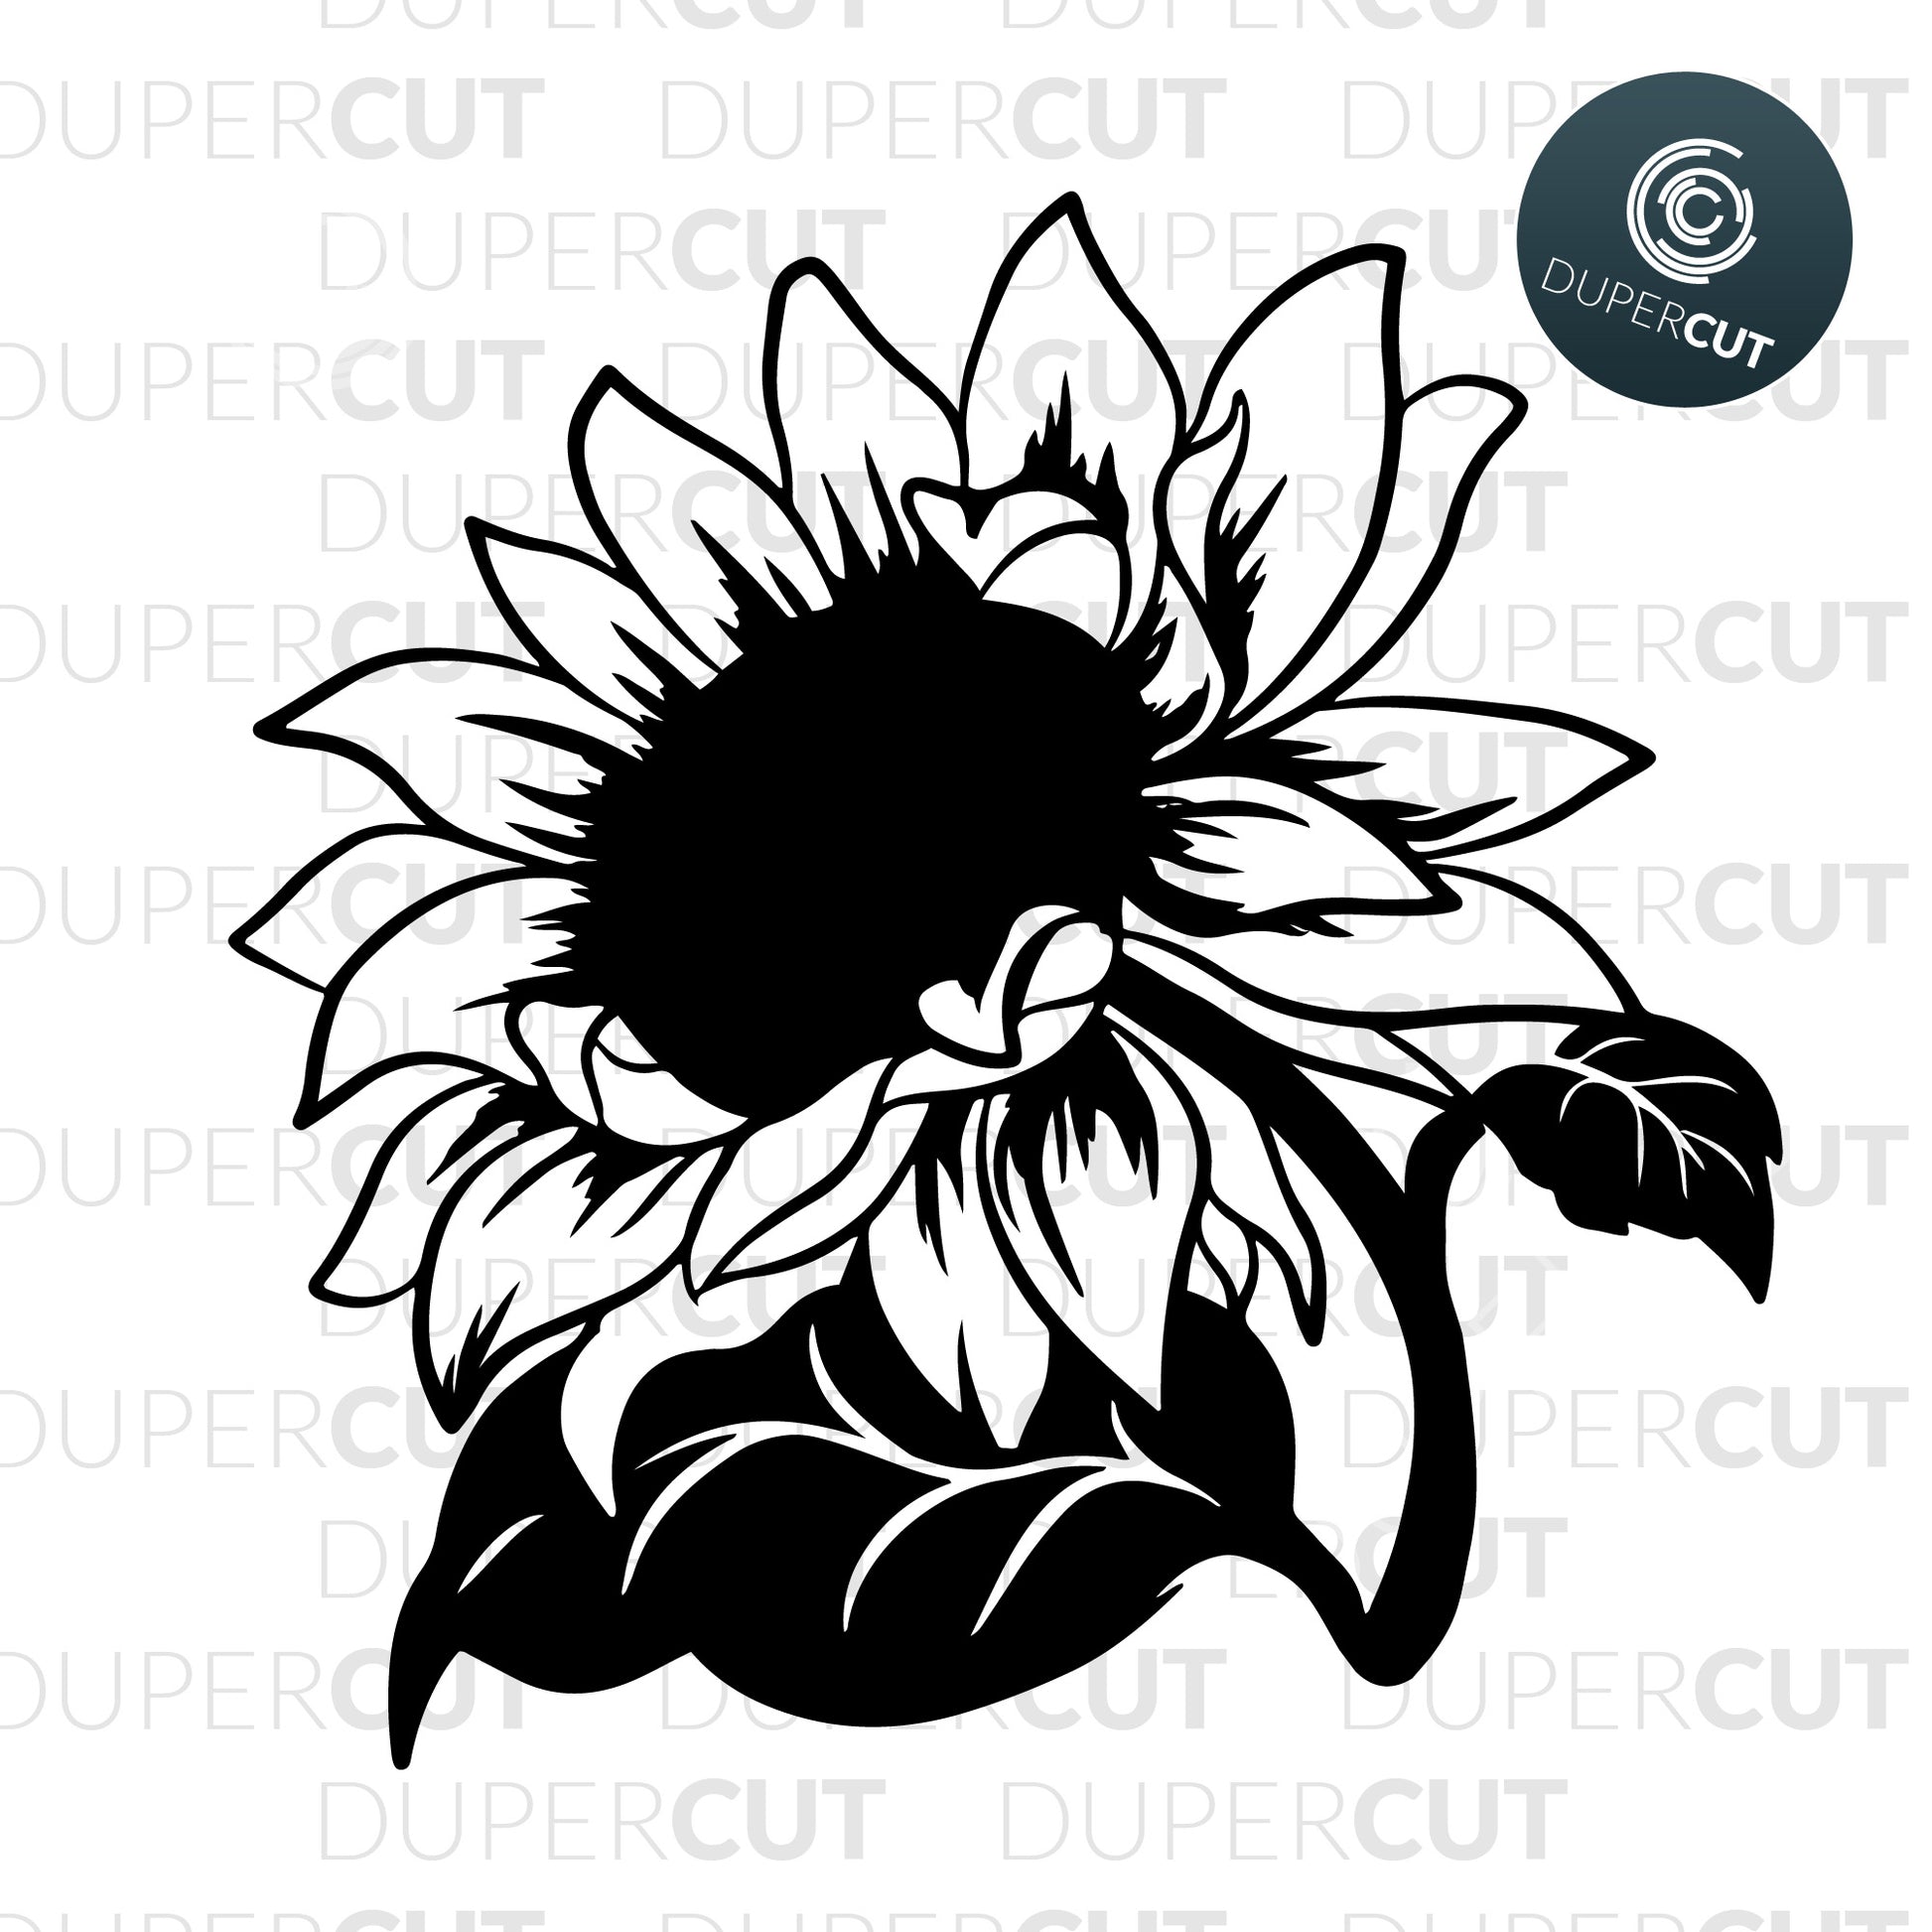 Sunflower black vector hand drawing  template - SVG DXF PNG files for Cricut, Glowforge, Silhouette Cameo, CNC Machines